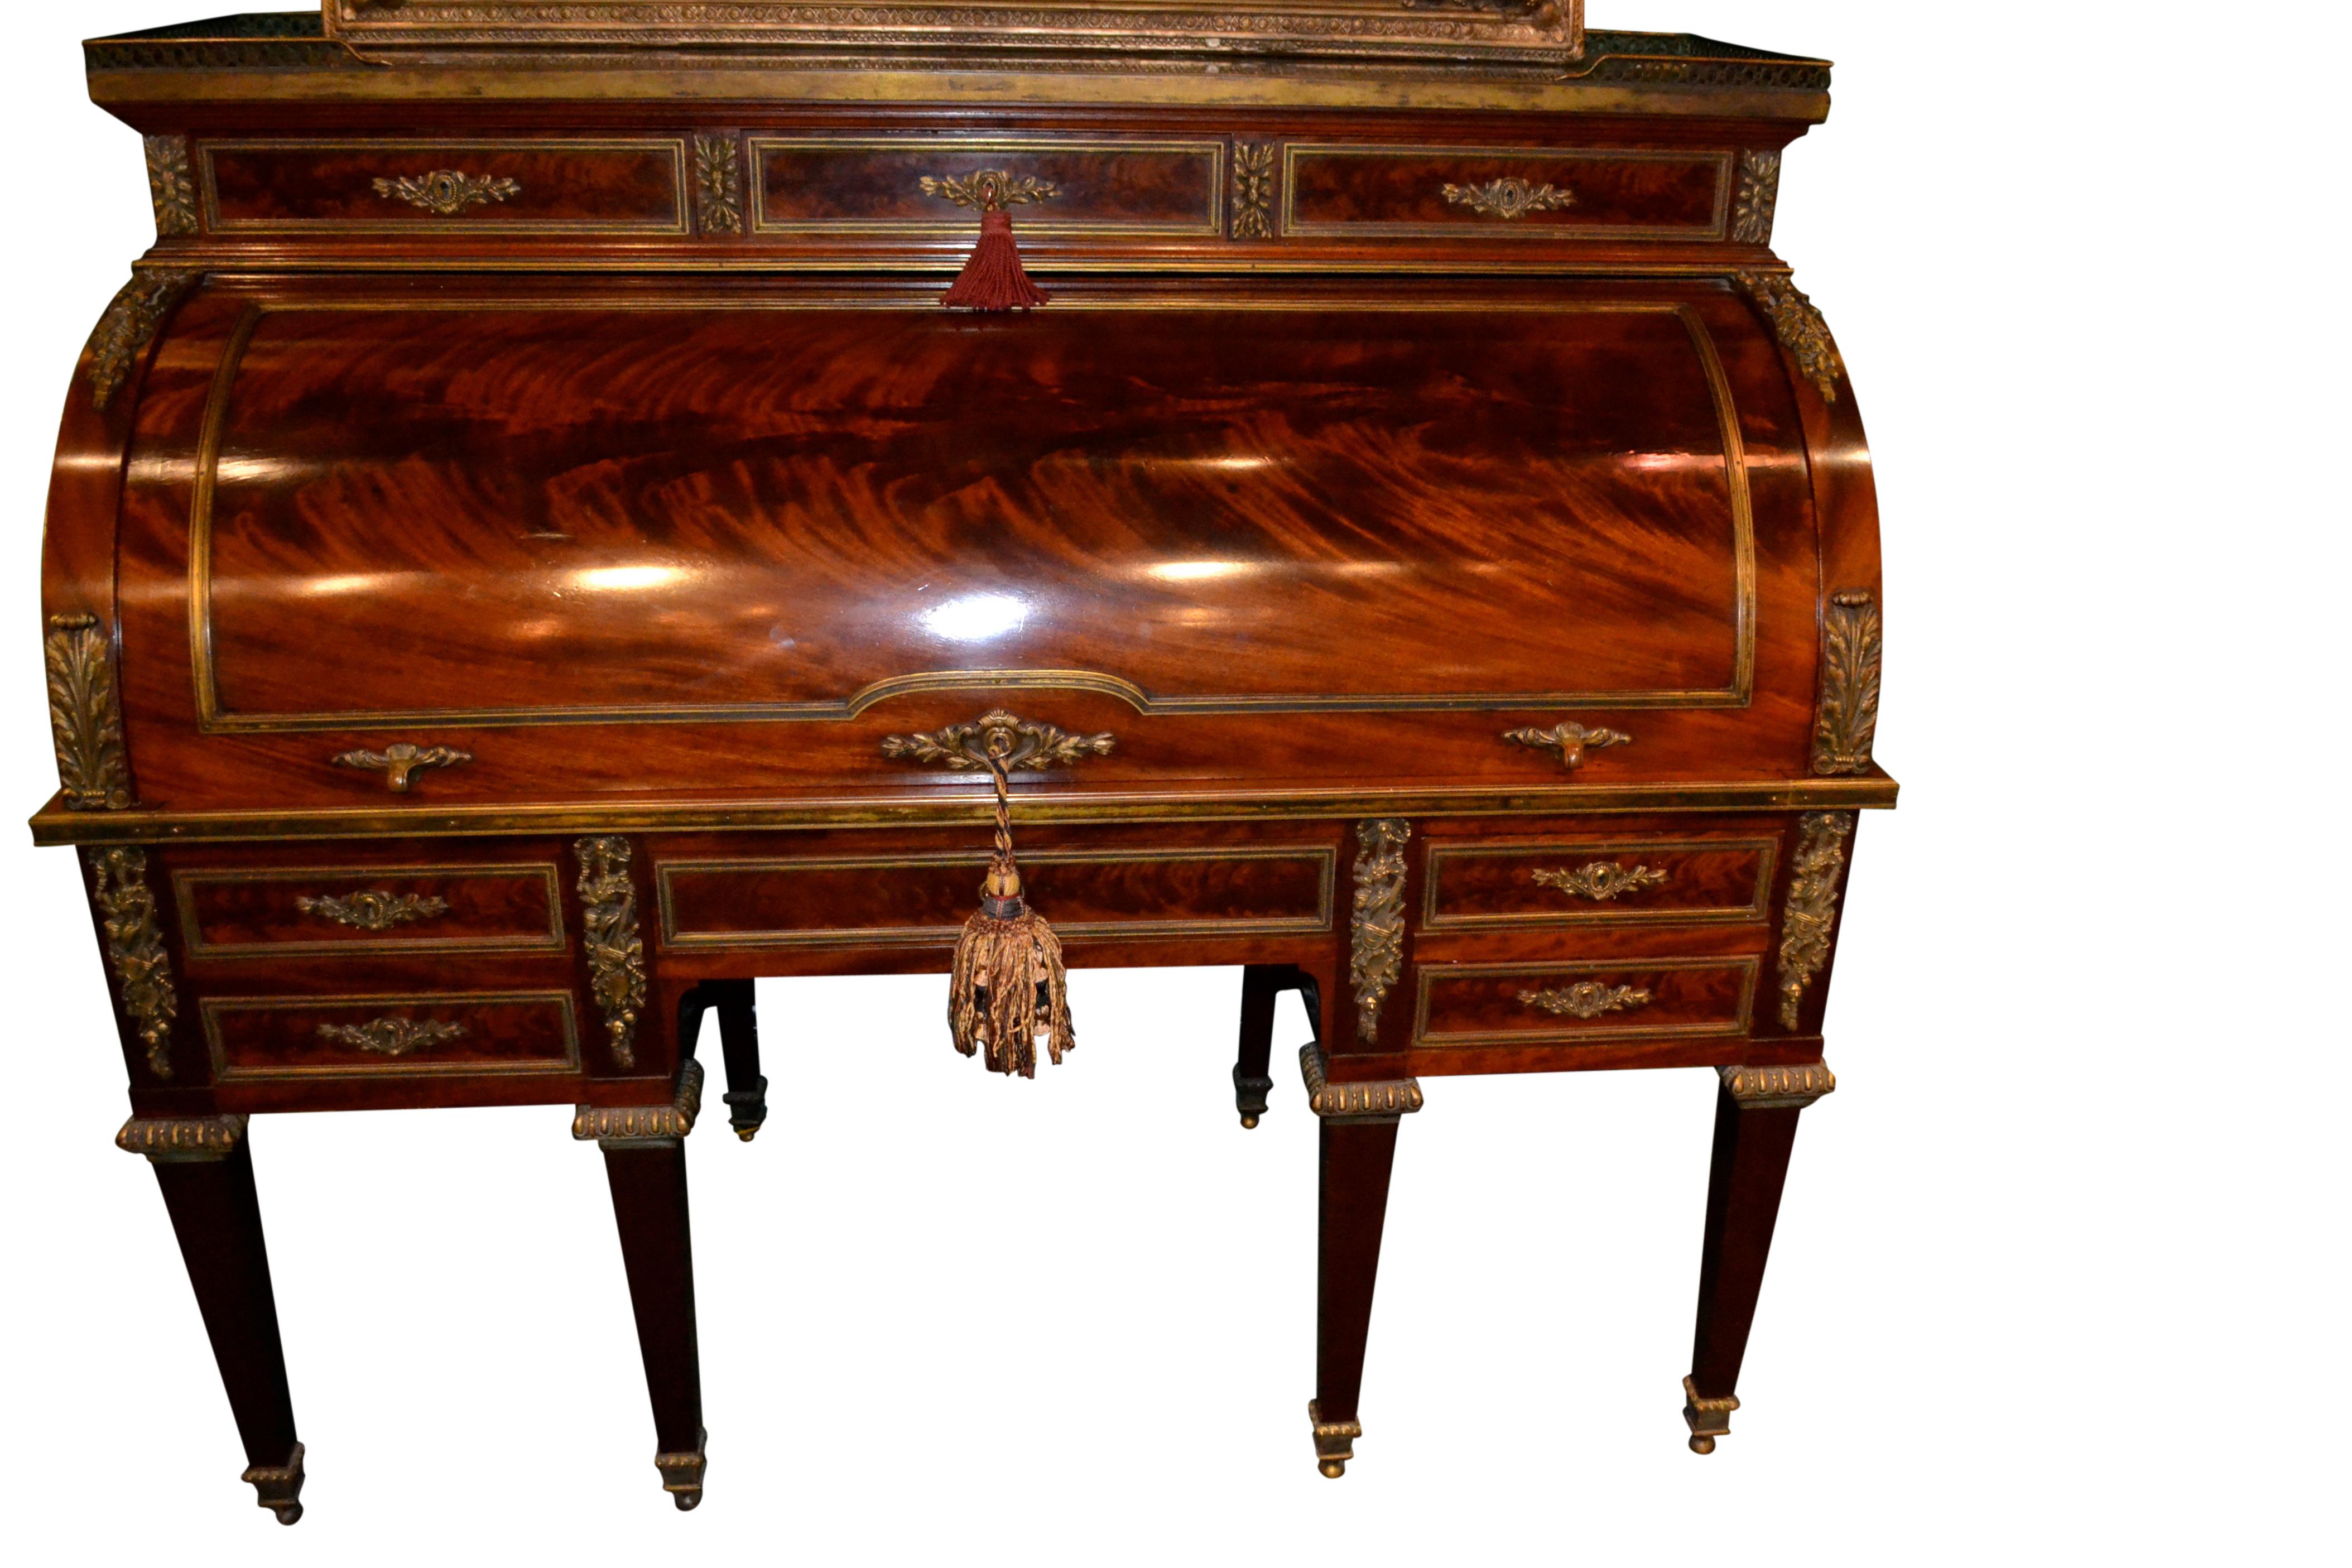 An imposing Louis XVI style roll top desk in beautifully figured mahogany and having finely chased and gilded bronze mounts; the green marble top with a bronze gallery above three long drawers, the open roll top reveals a number fitted drawers above